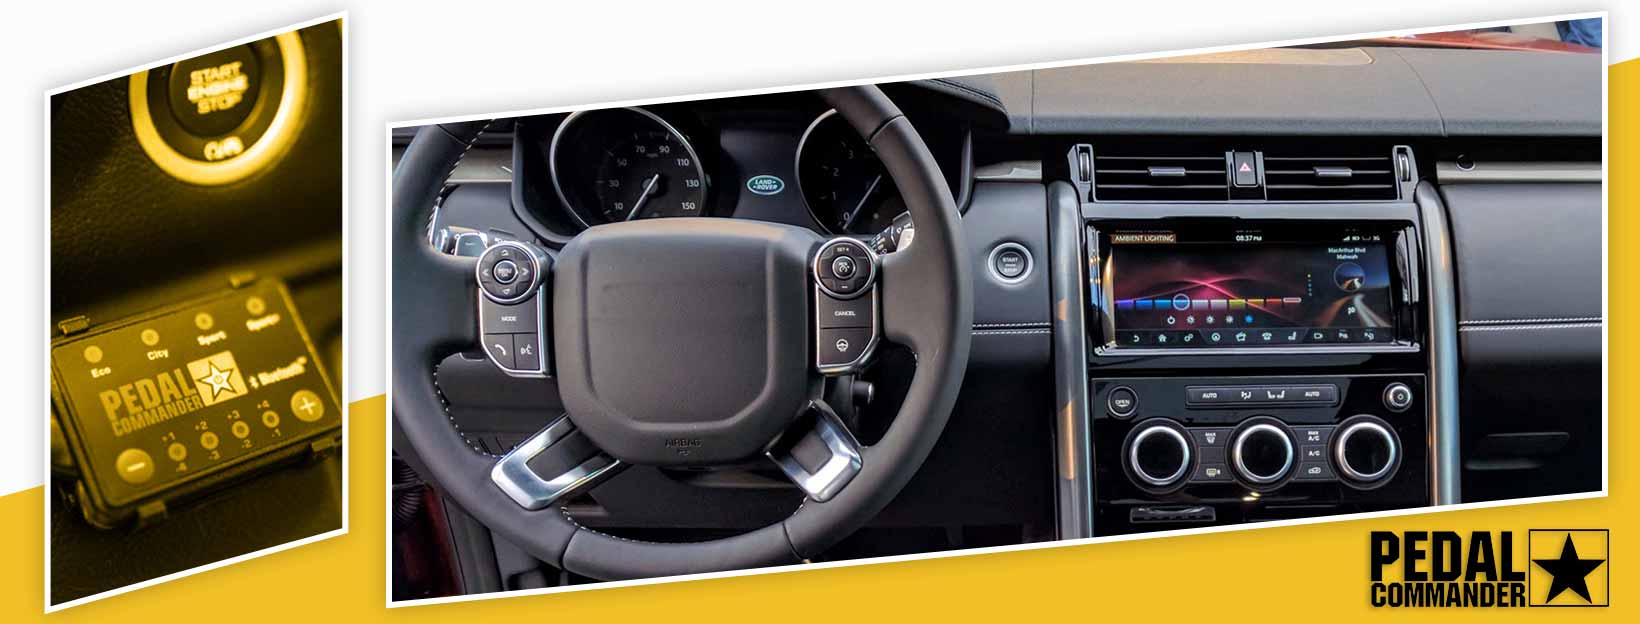 Pedal Commander for Land Rover Discovery - interior